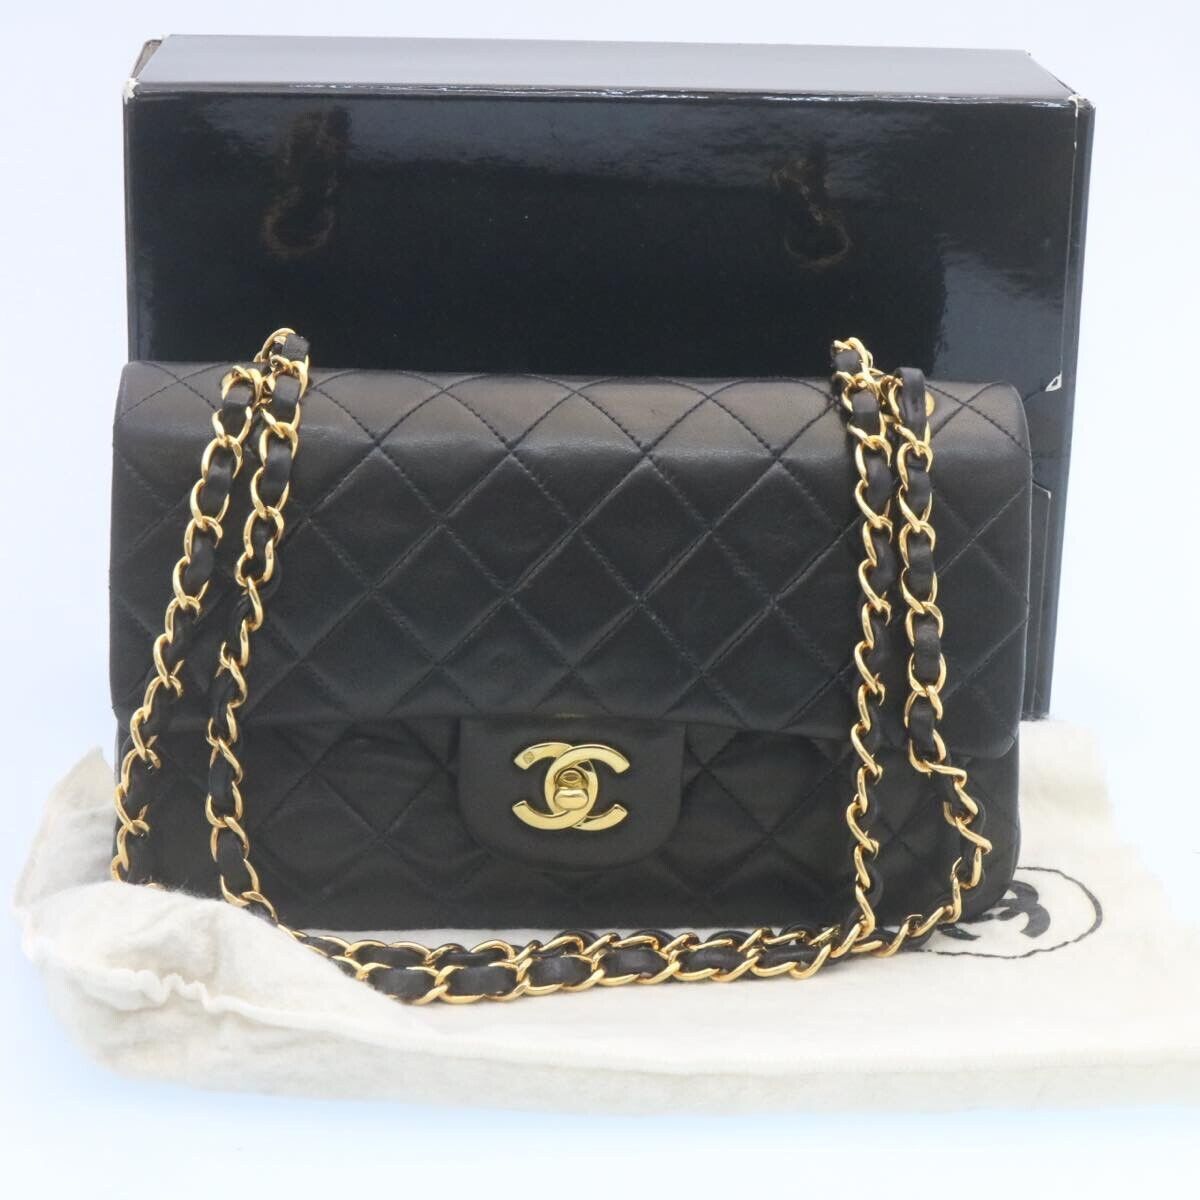 Chanel Black Lambskin Leather Classic Double Flap Bag